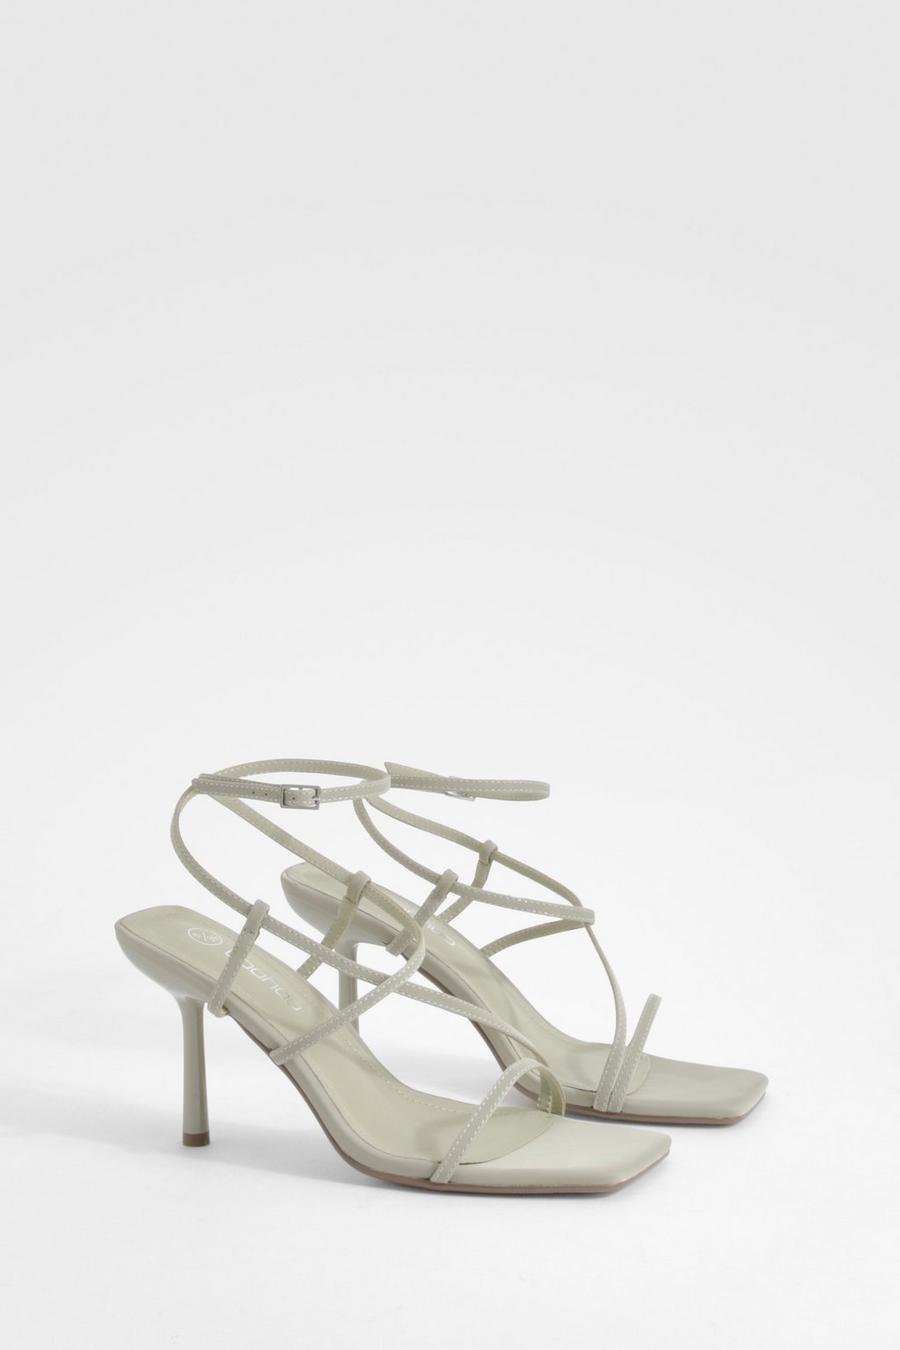 Sage Square Toe Strappy Mid Height Heels 